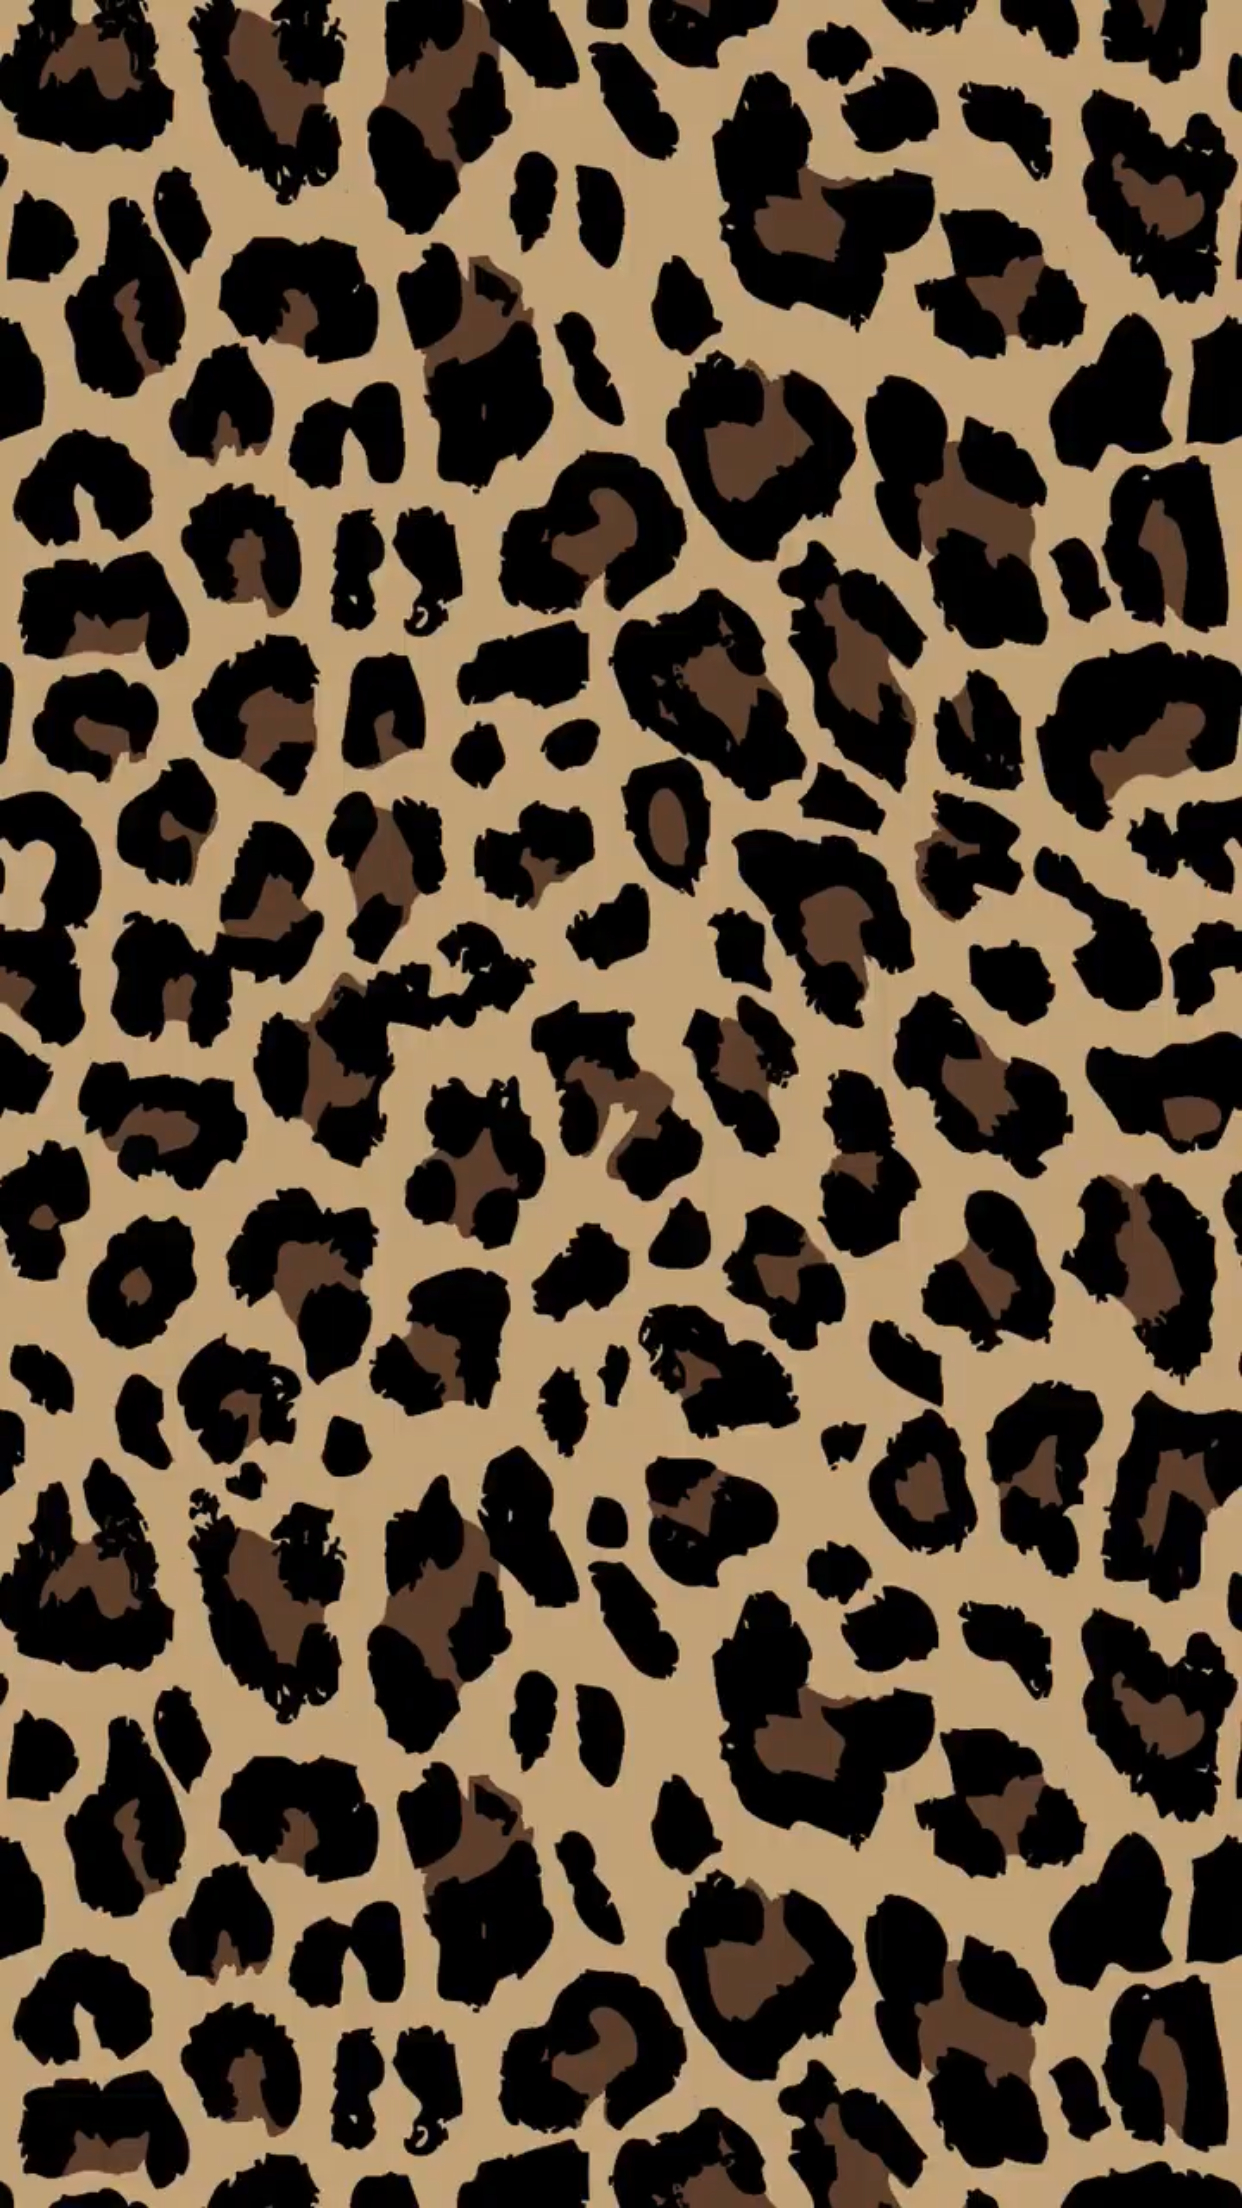 1242x2208 Pin by Louise Furiati on Background / Wallpapers | Animal print wallpaper, Cheetah print wallpaper, Print wallpaper